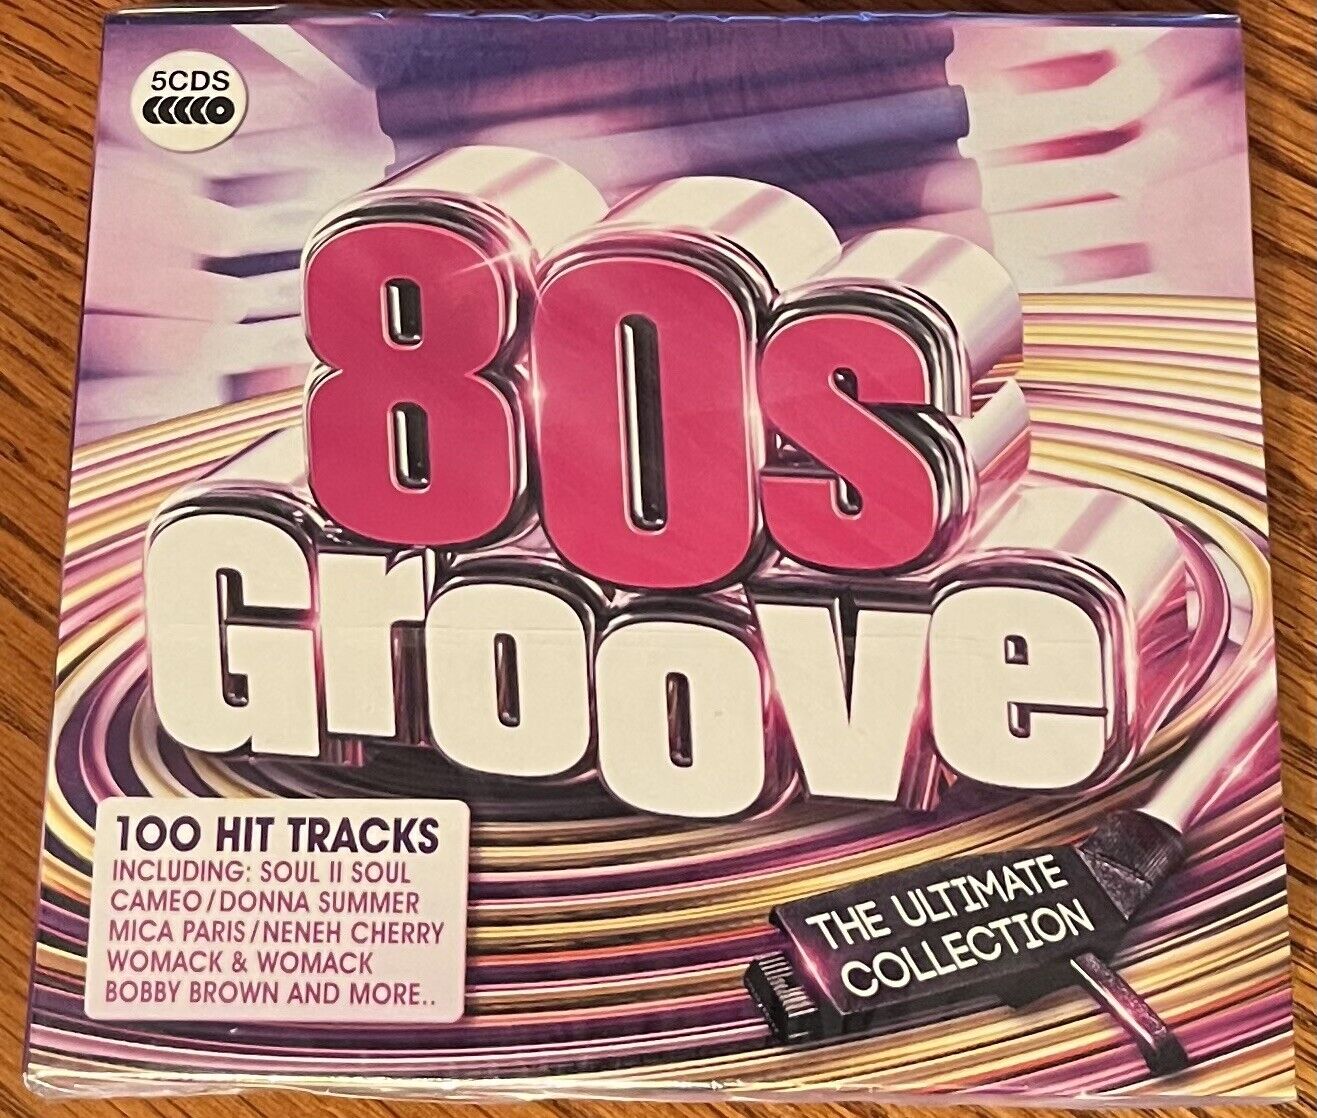 VARIOUS ARTISTS “80'S GROOVE” BRAND NEW 2015 UK 5CD ALBUM IMPORT (100 HITS)